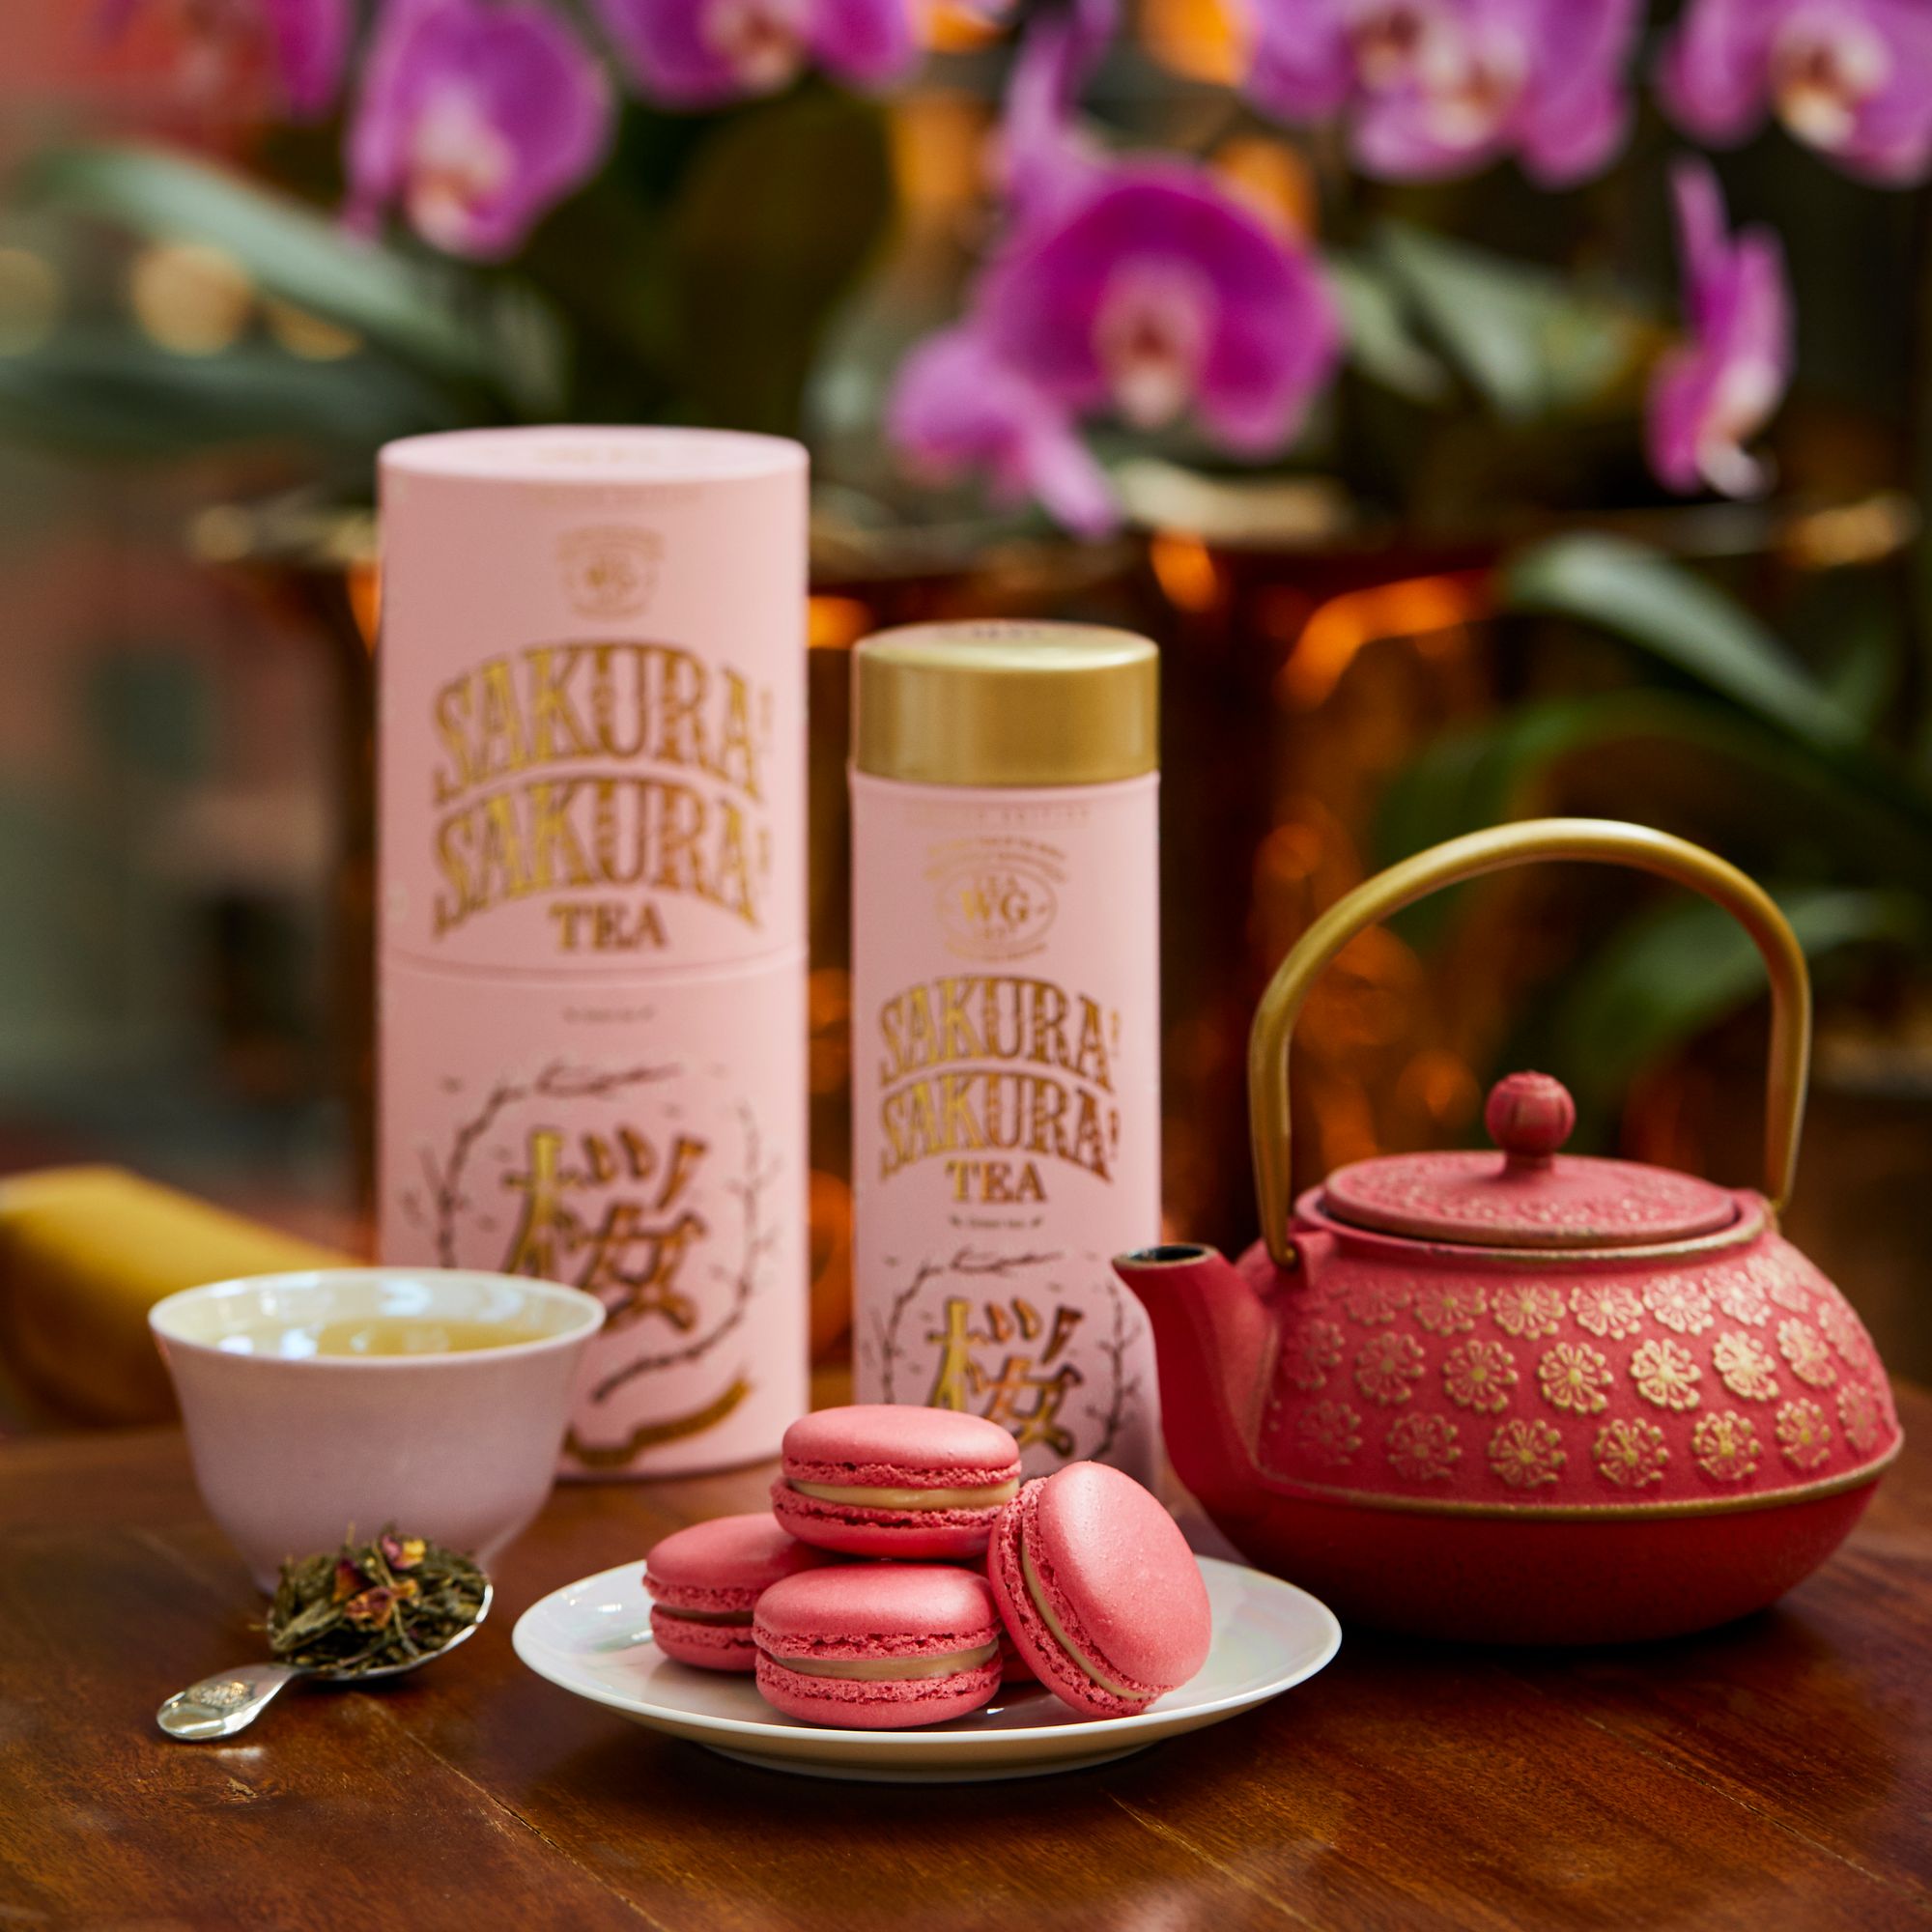 Pamper The Queen of Your Heart with Tea WG this Blossoming Spring